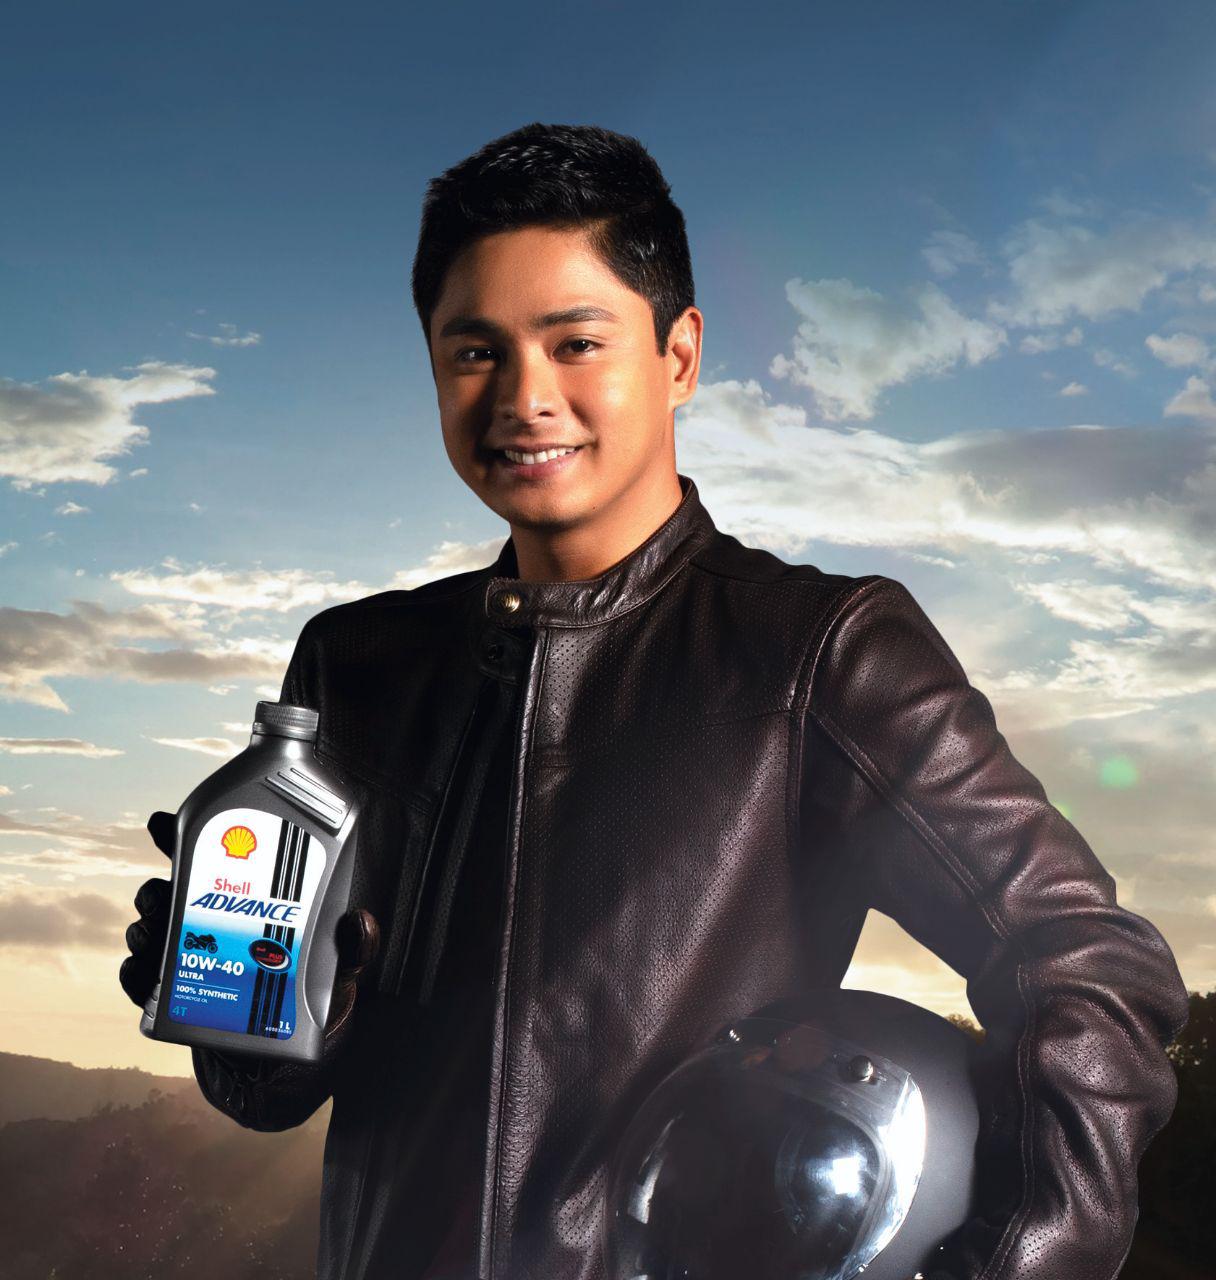 Coco Martin Brought Excitement To Shell Advance Elite Partners.